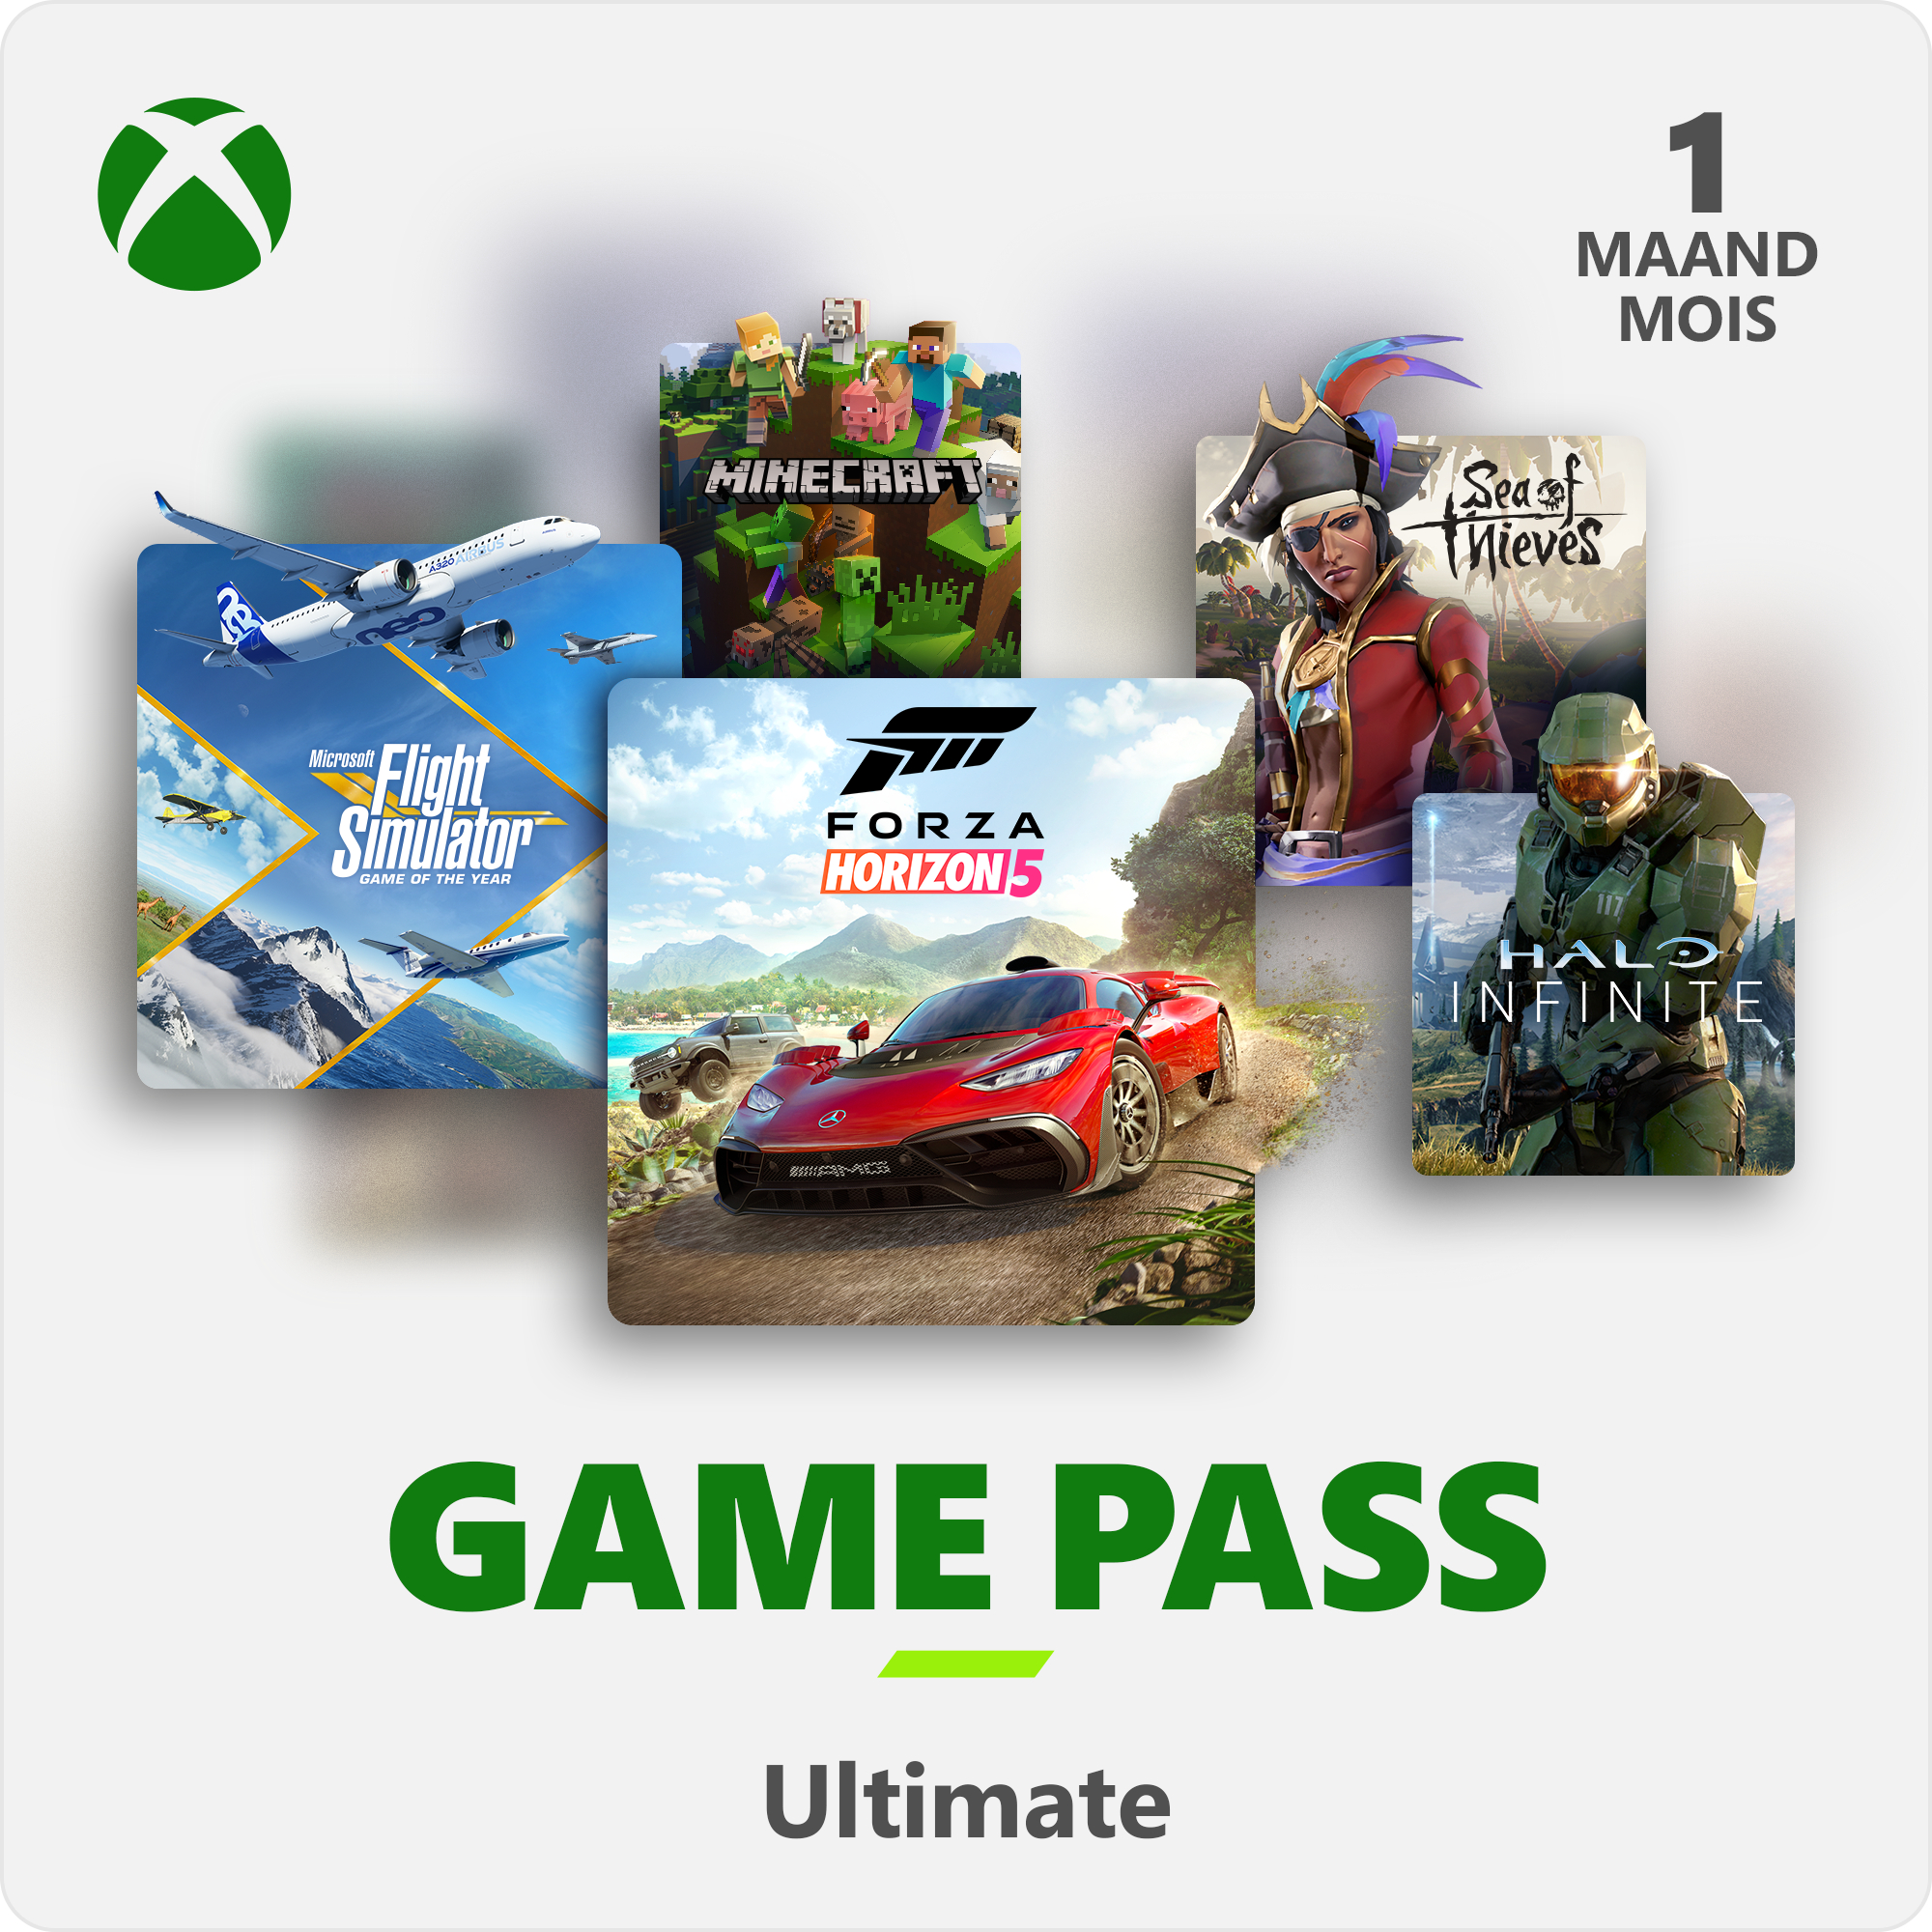 Xbox Game Pass Ultimate 1 Mois